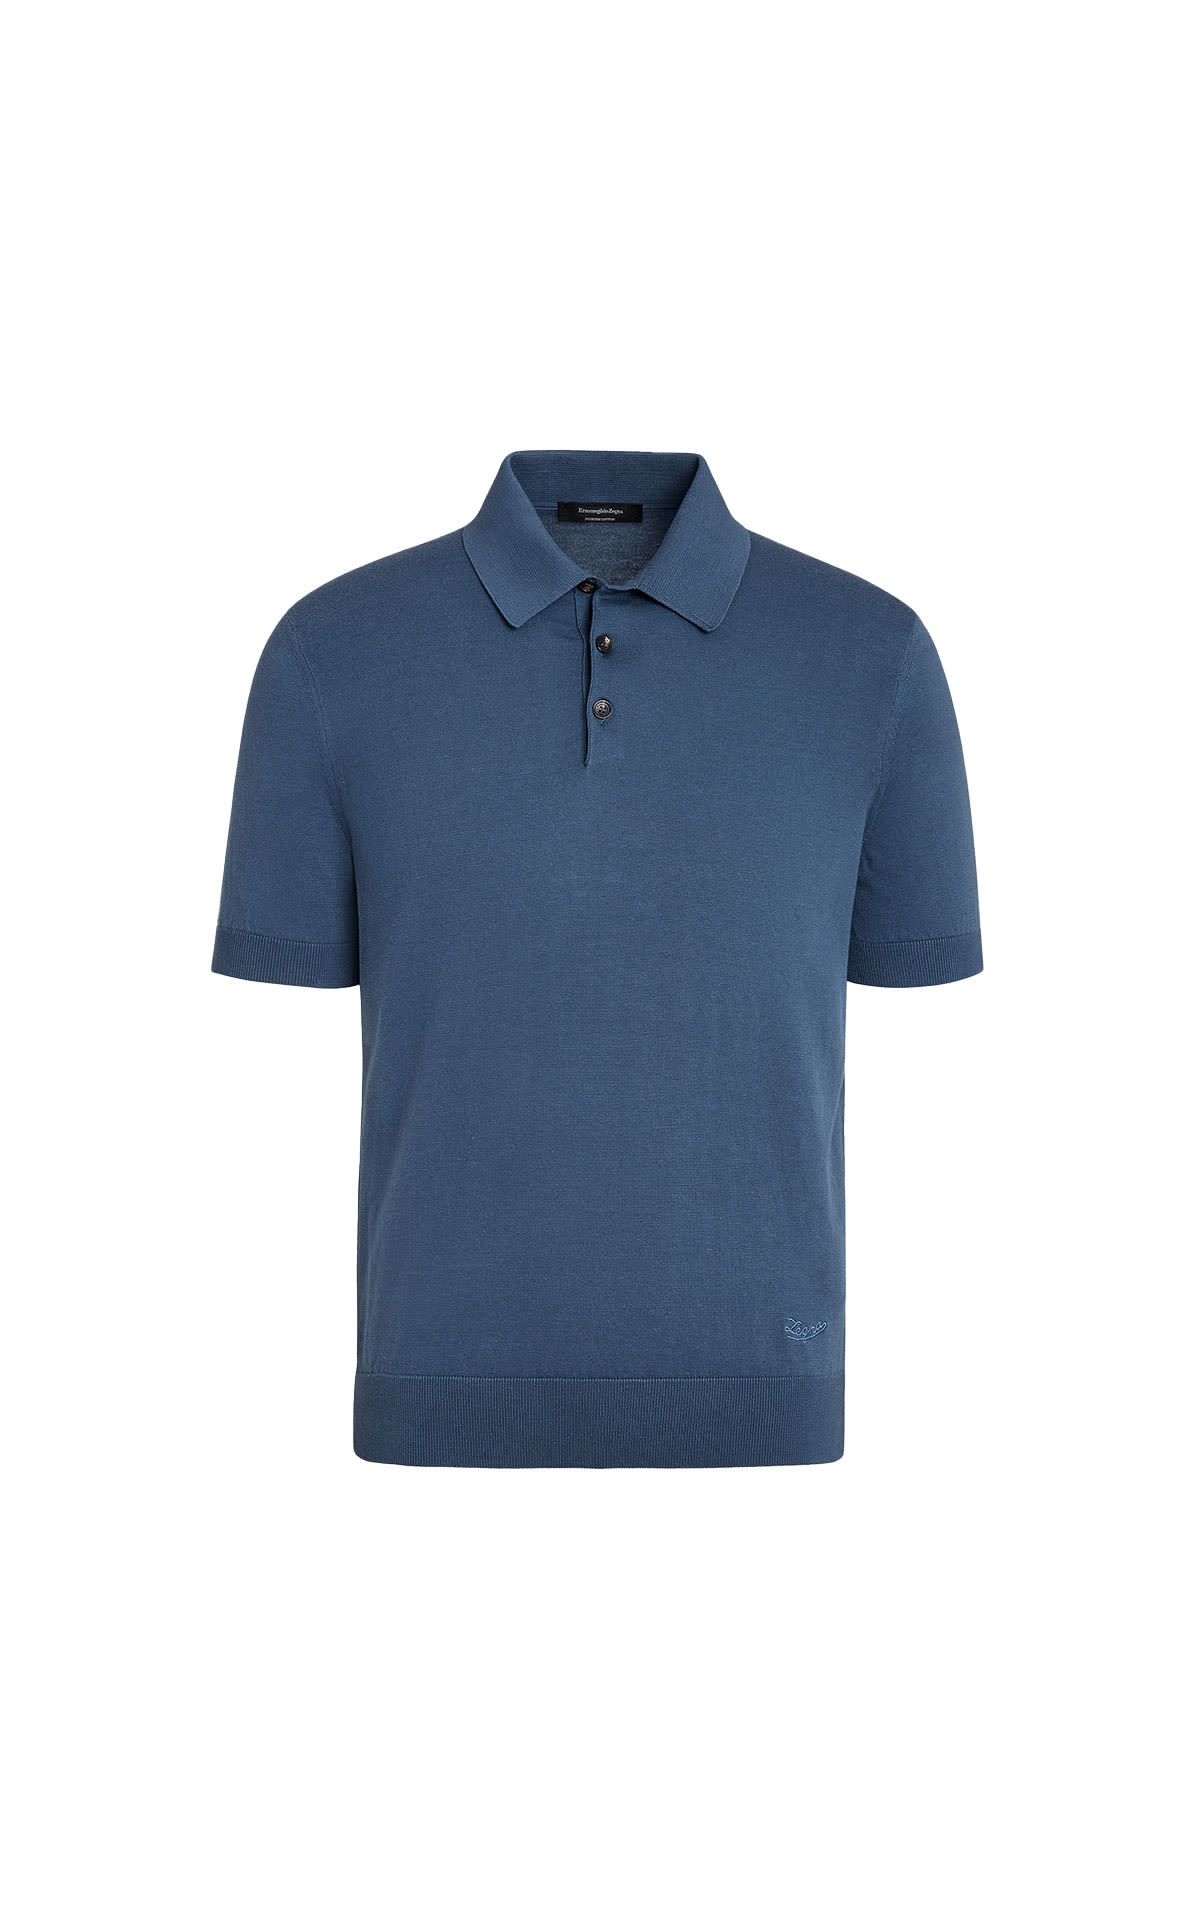 Zegna Polo from Bicester Village